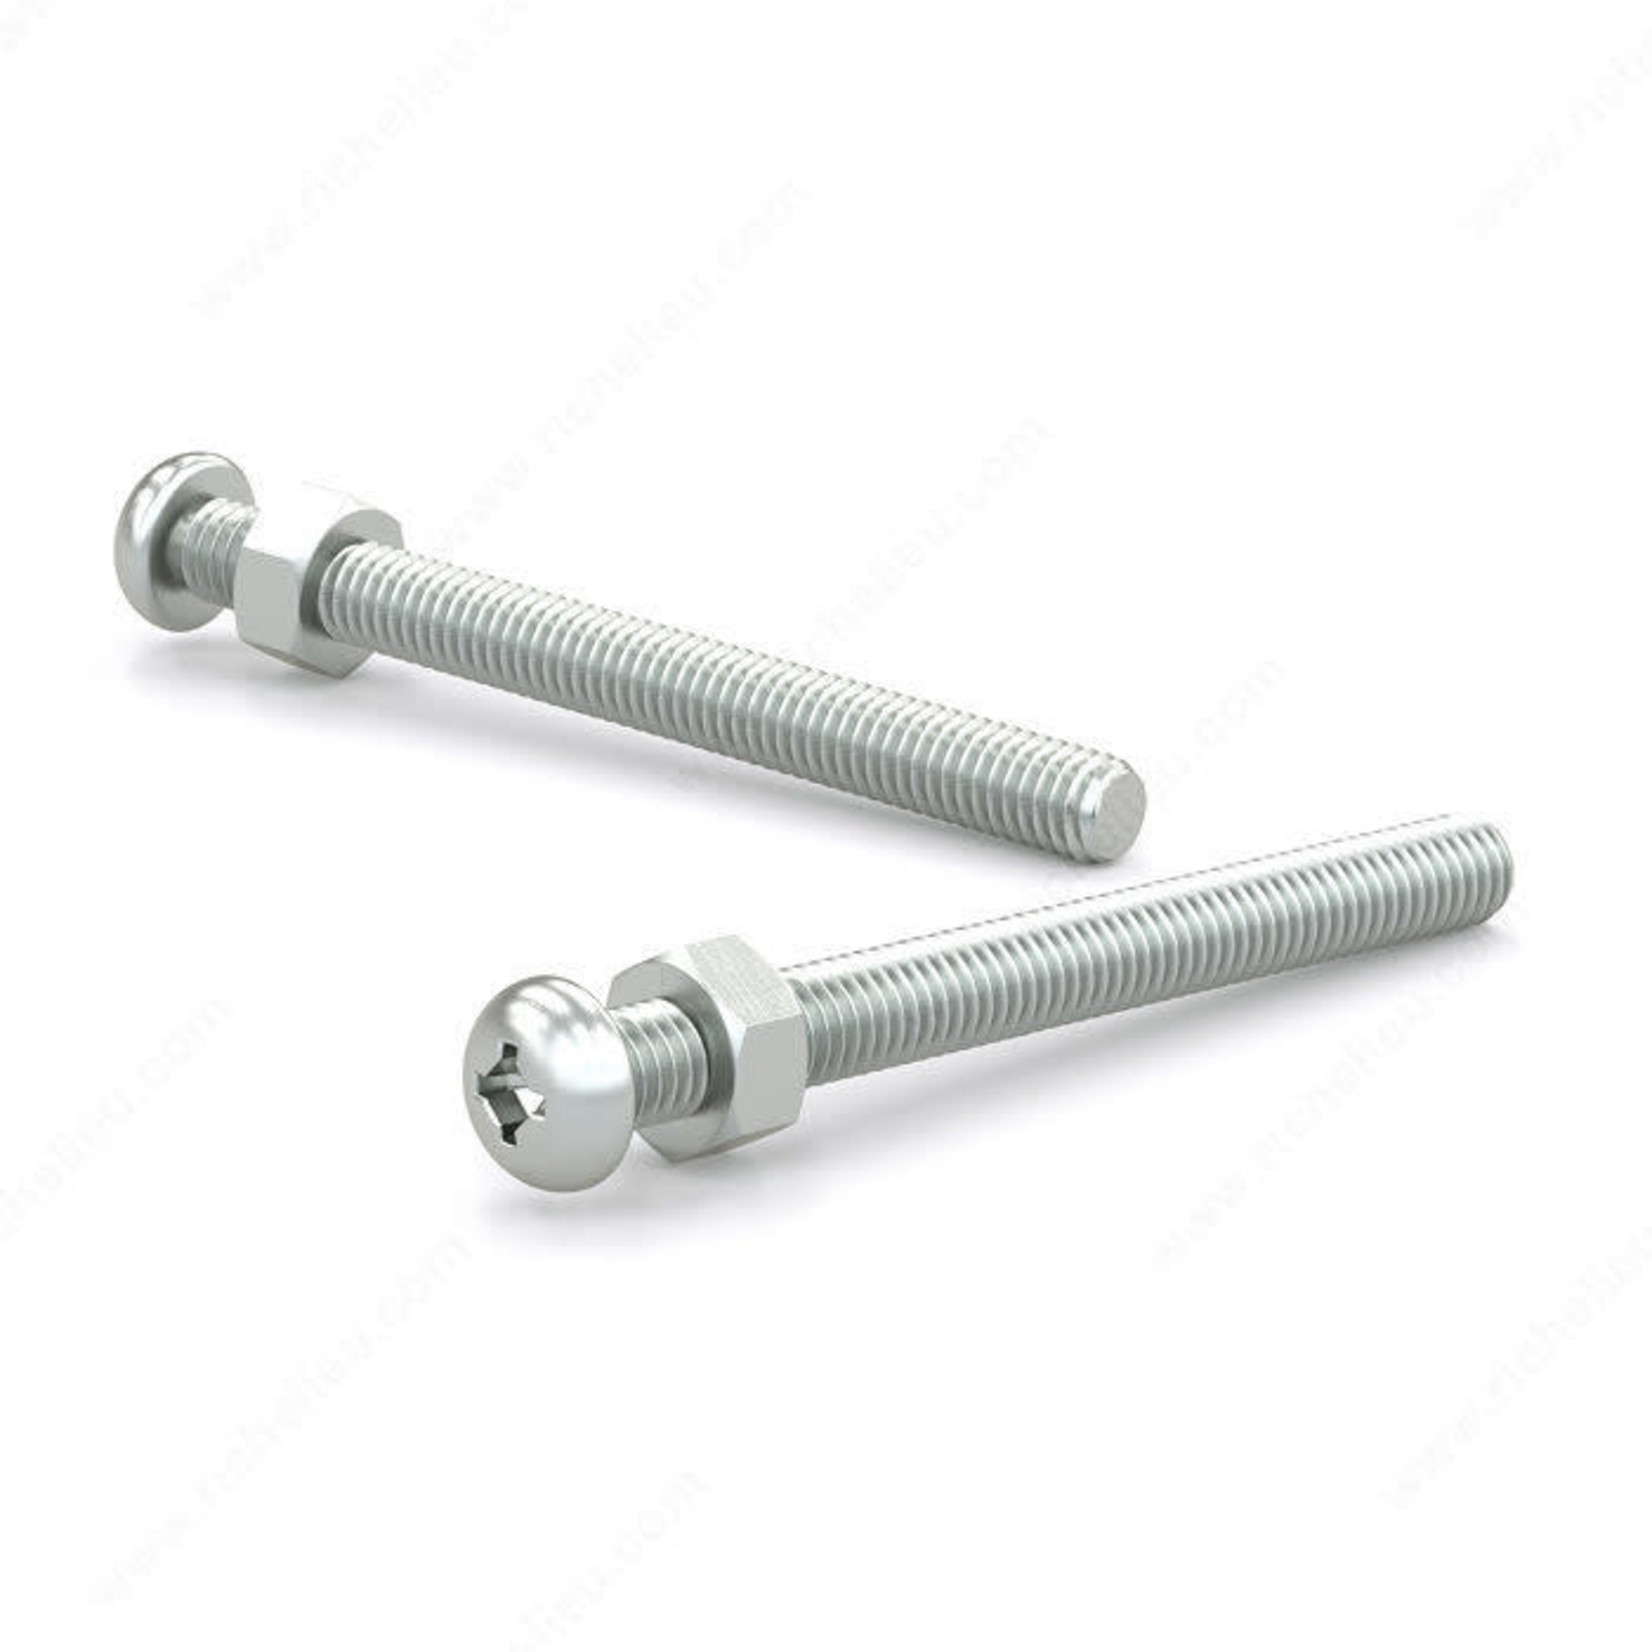 RELIABLE MACHINE SCREW WITH NUT, PAN HEAD, 1/4" 1-1/2IN, 6PK BLISTER